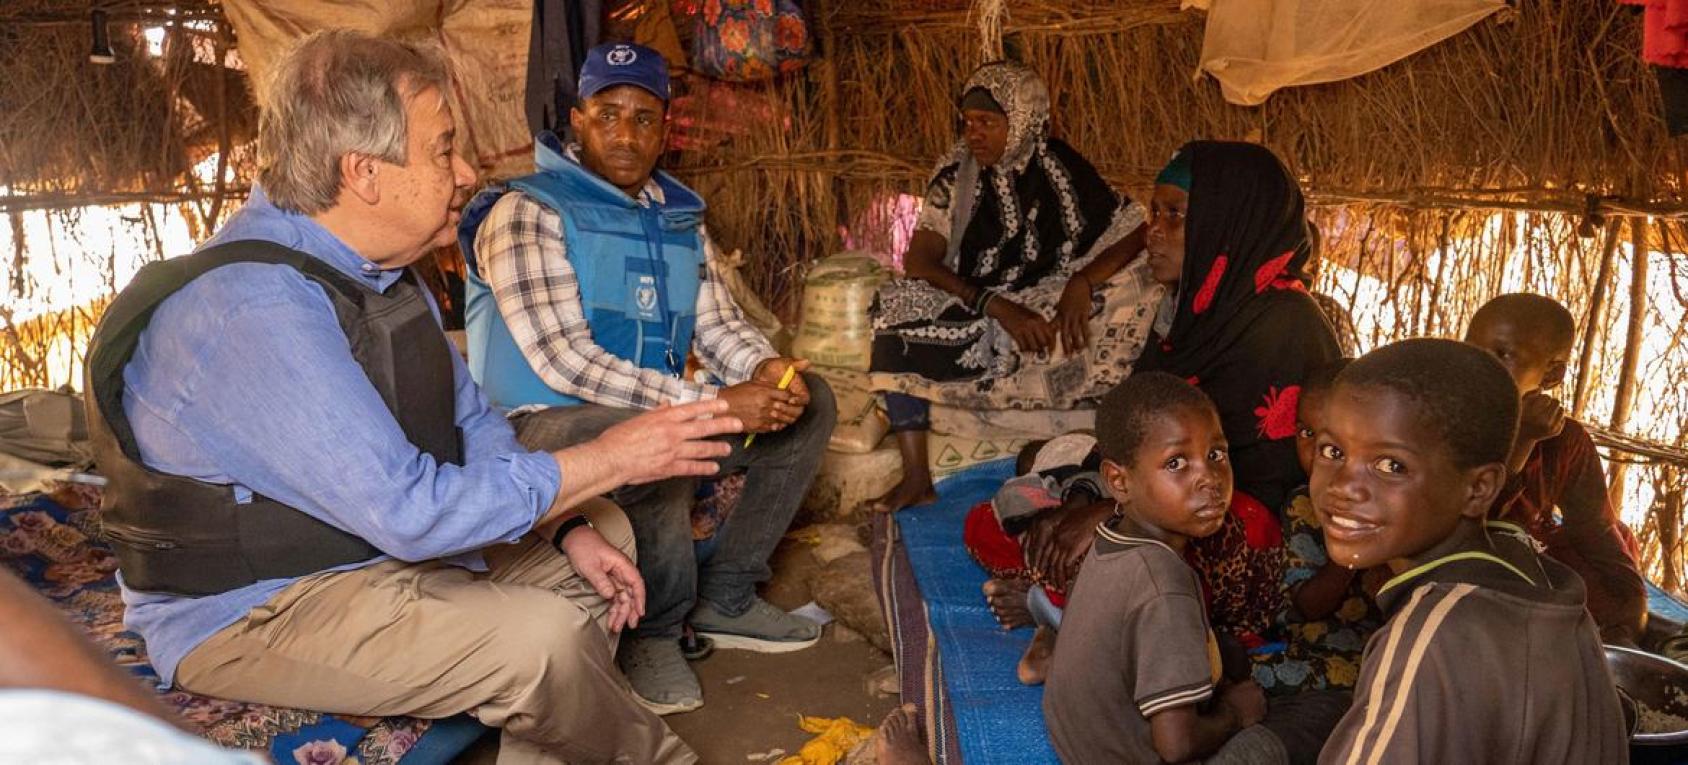 The UN Secretary General meets with a family and children in Somalia in a small makeshift tent